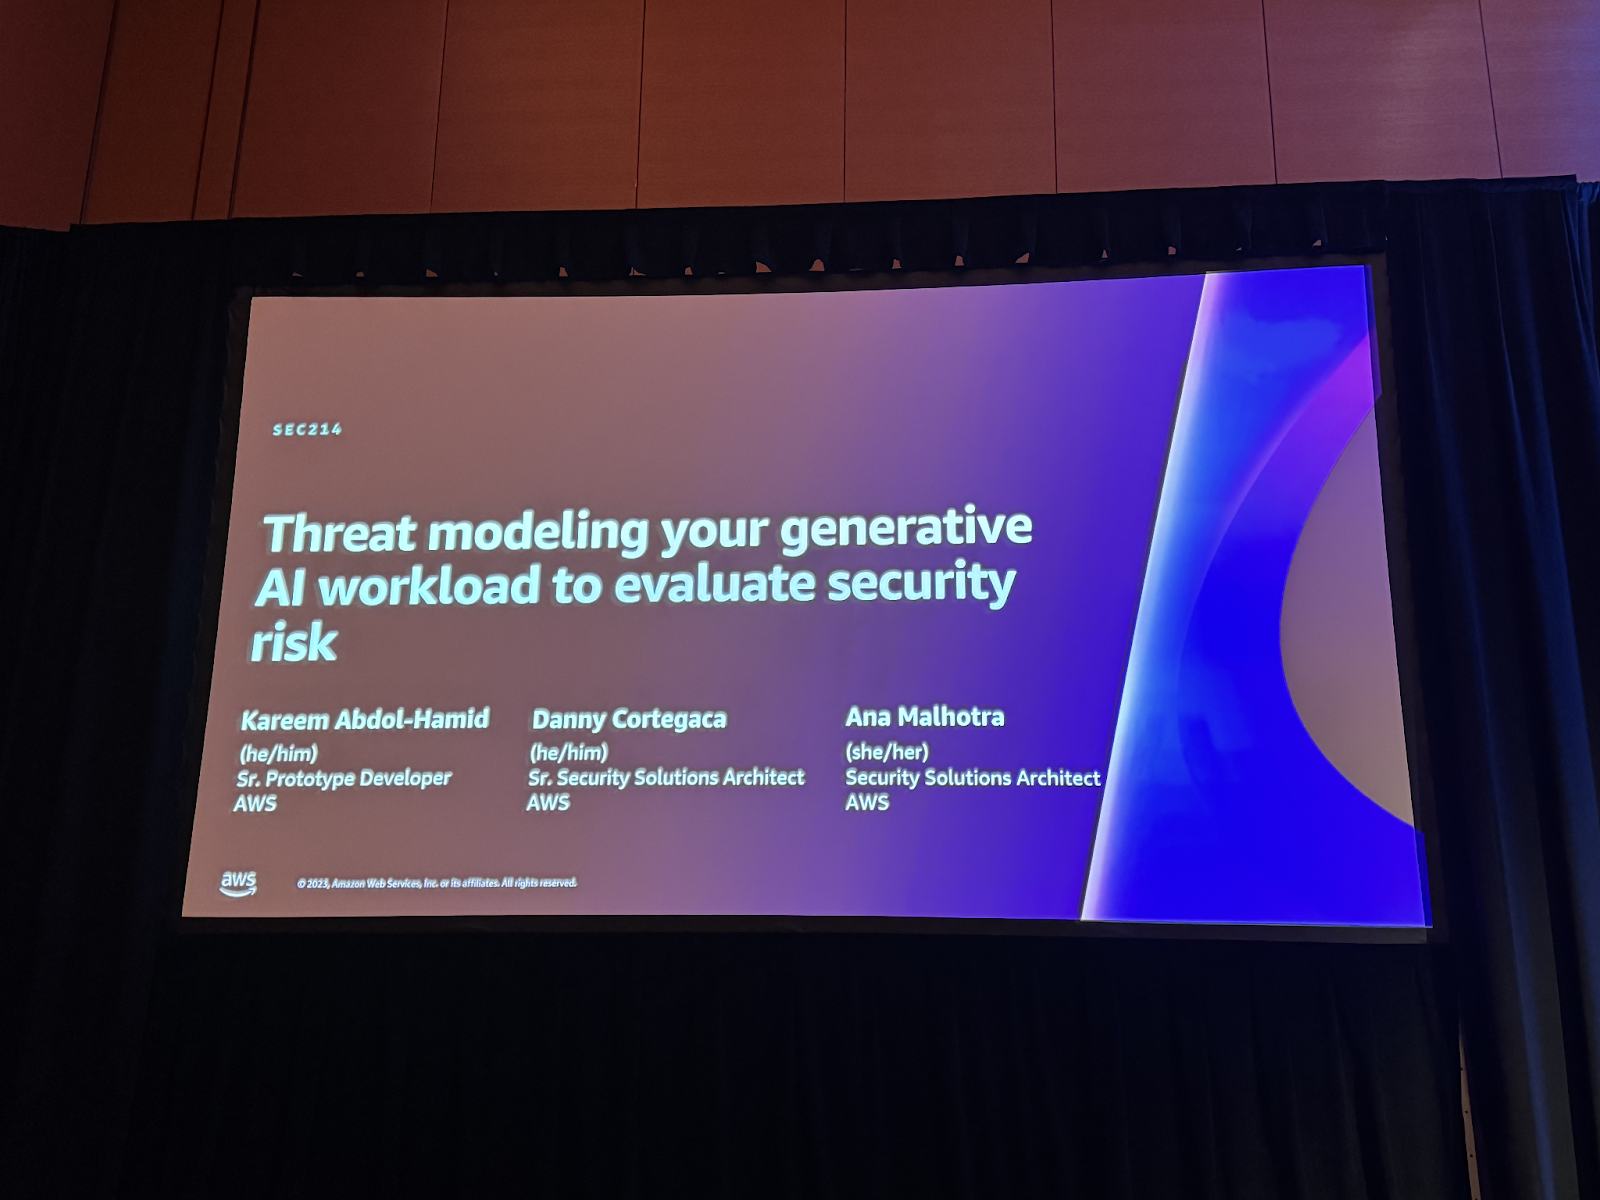 Threat modeling your generative AI workload to evaluate security risk